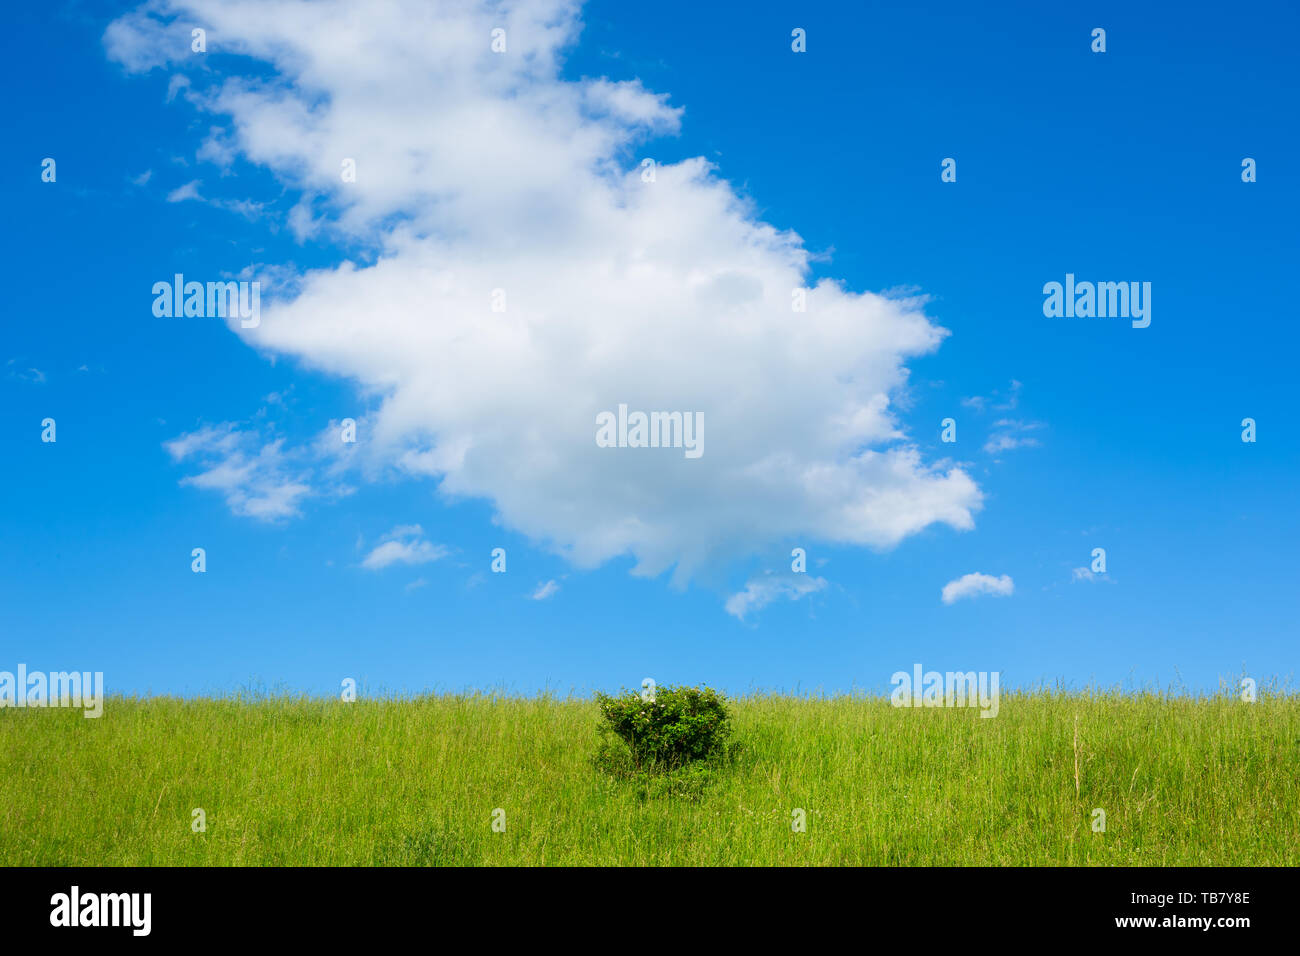 Landscape with low horizon and clouds Stock Photo